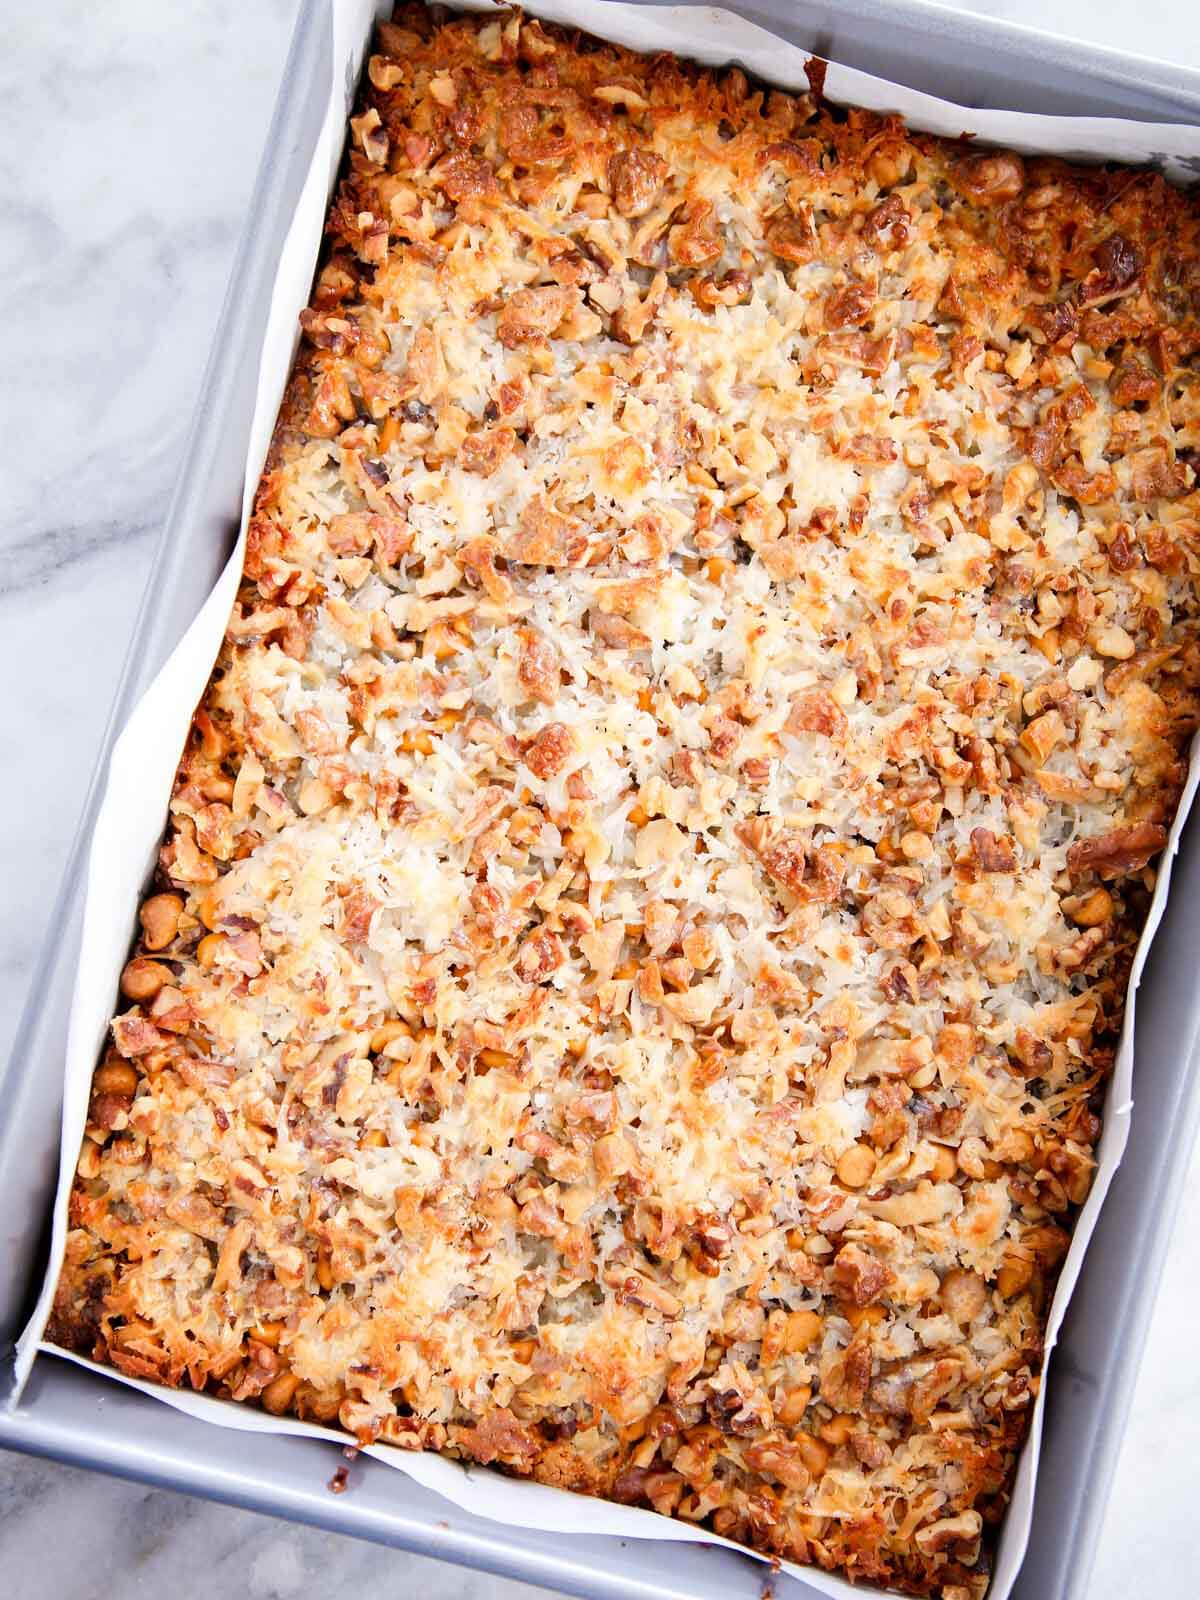 unsliced pan of baked 7 layer bars.